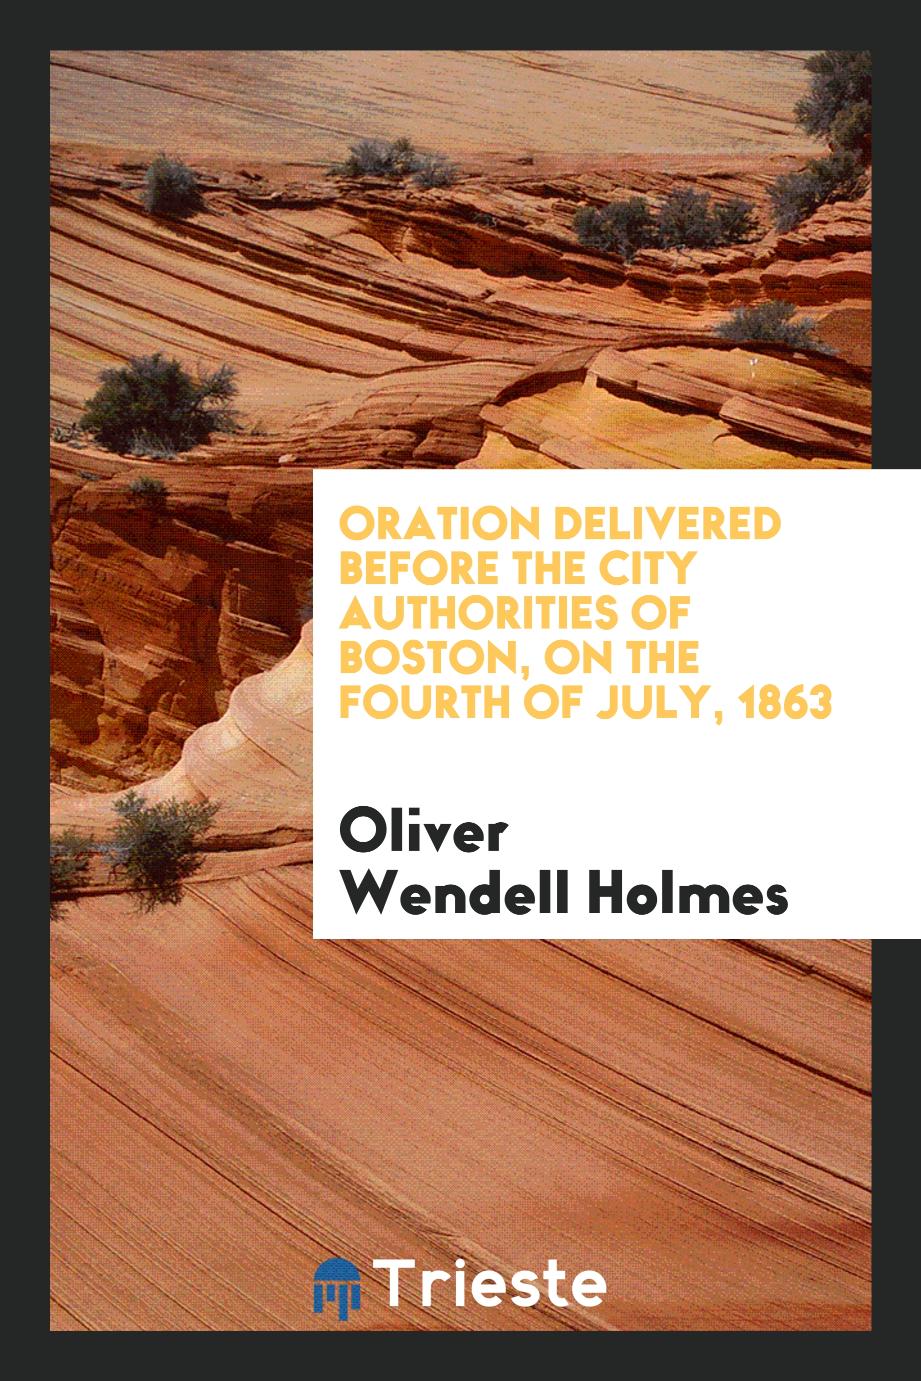 Oliver Wendell Holmes - Oration delivered before the City Authorities of Boston, on the Fourth of July, 1863